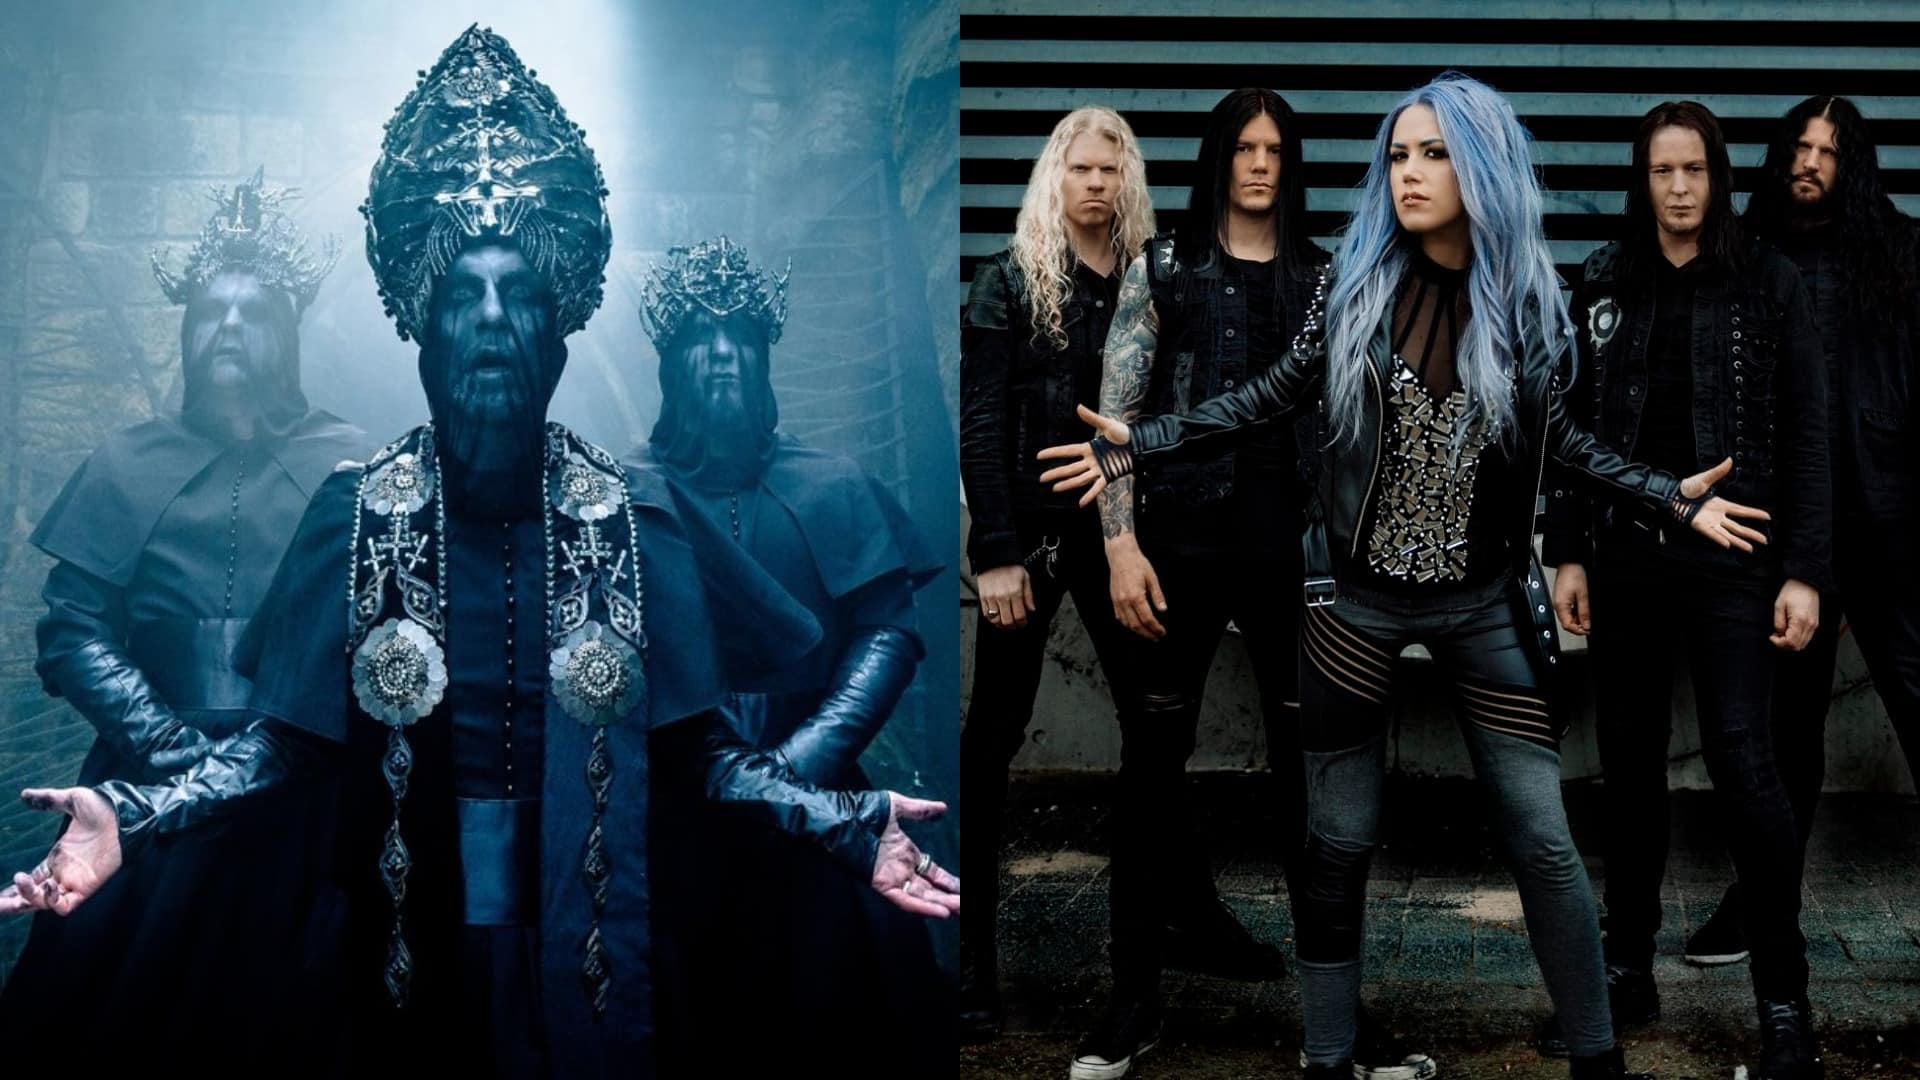 BEHEMOTH And ARCH ENEMY Postpone “The European Siege” Tour Due To COVID-19